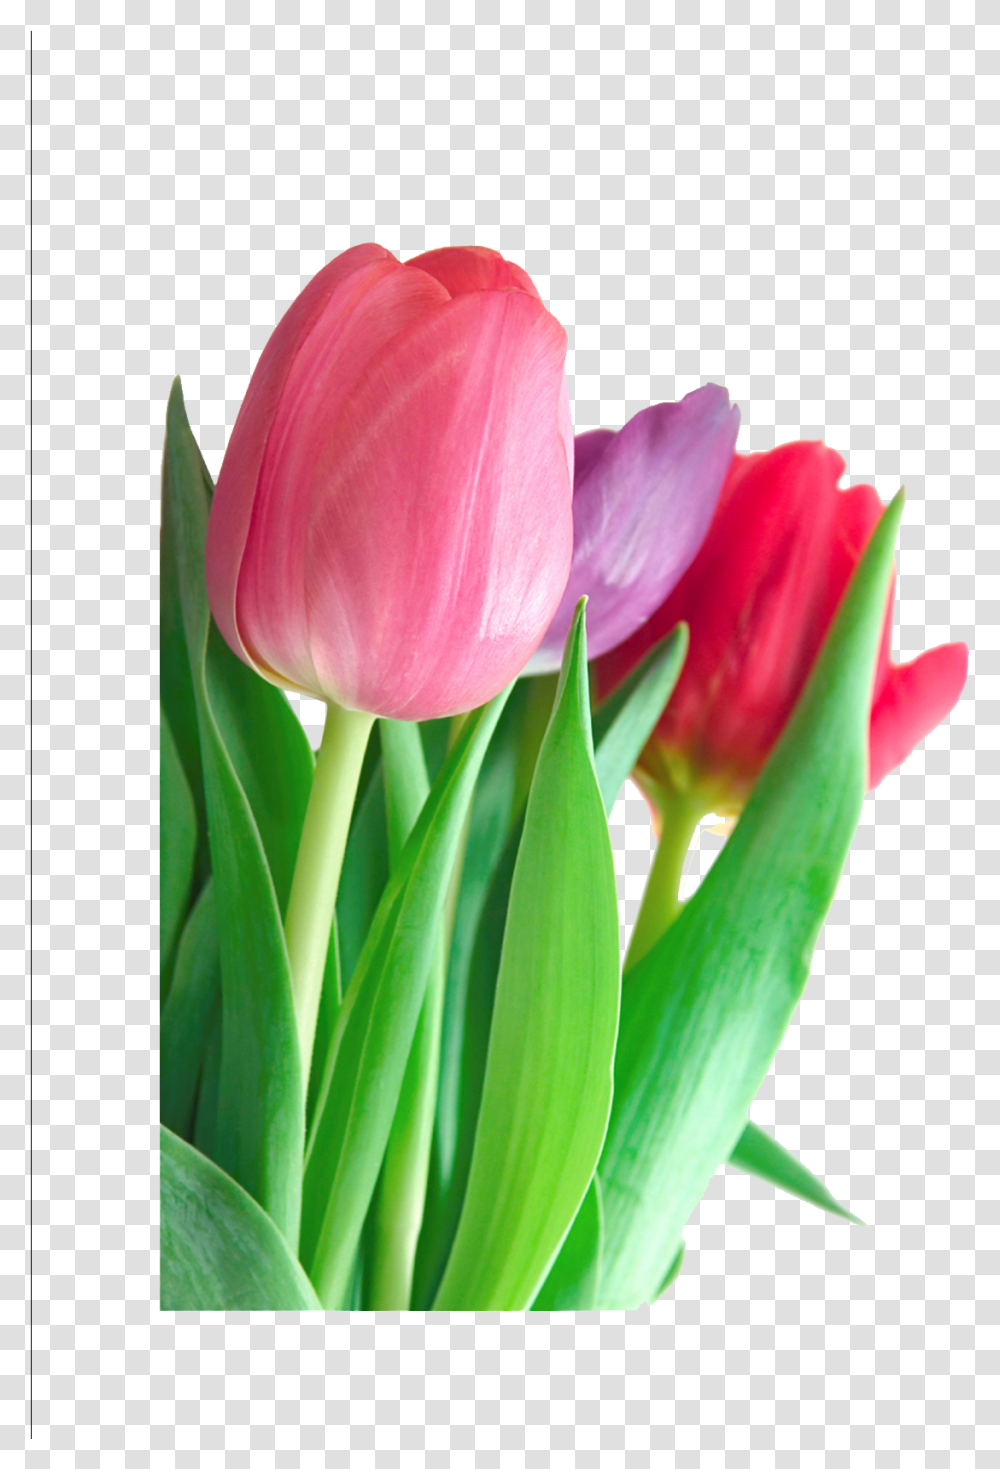 Download Tulip Clipart Hq Image Tulip Flower Information In English, Plant, Blossom, Petal Transparent Png